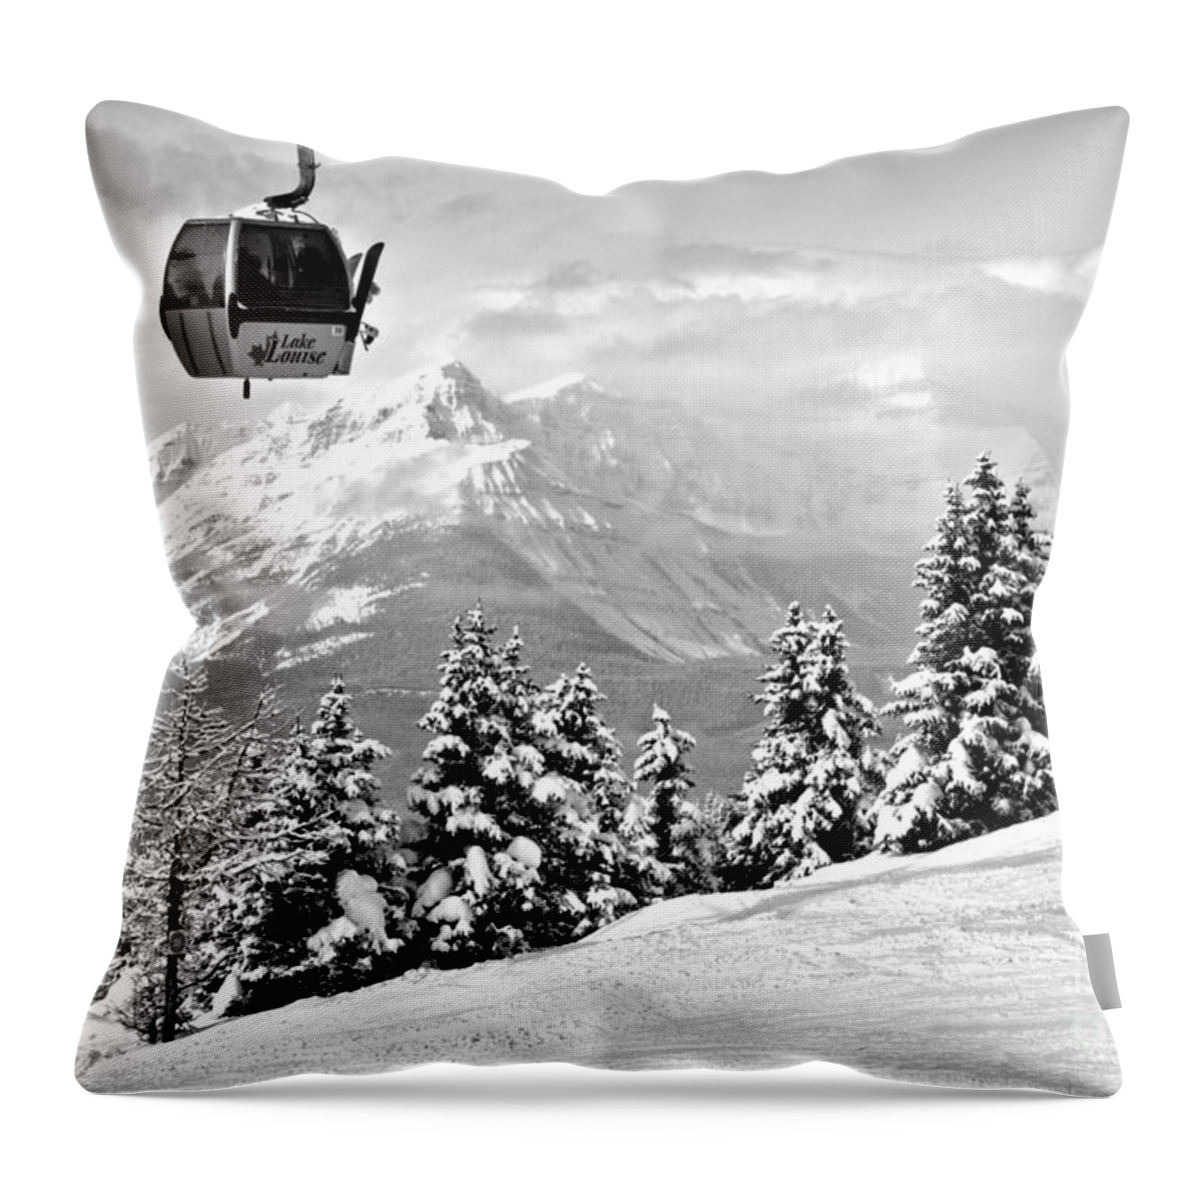 Lake Louise Throw Pillow featuring the photograph Lake Louise Gondola Over The Snow Ghosts Black And White by Adam Jewell